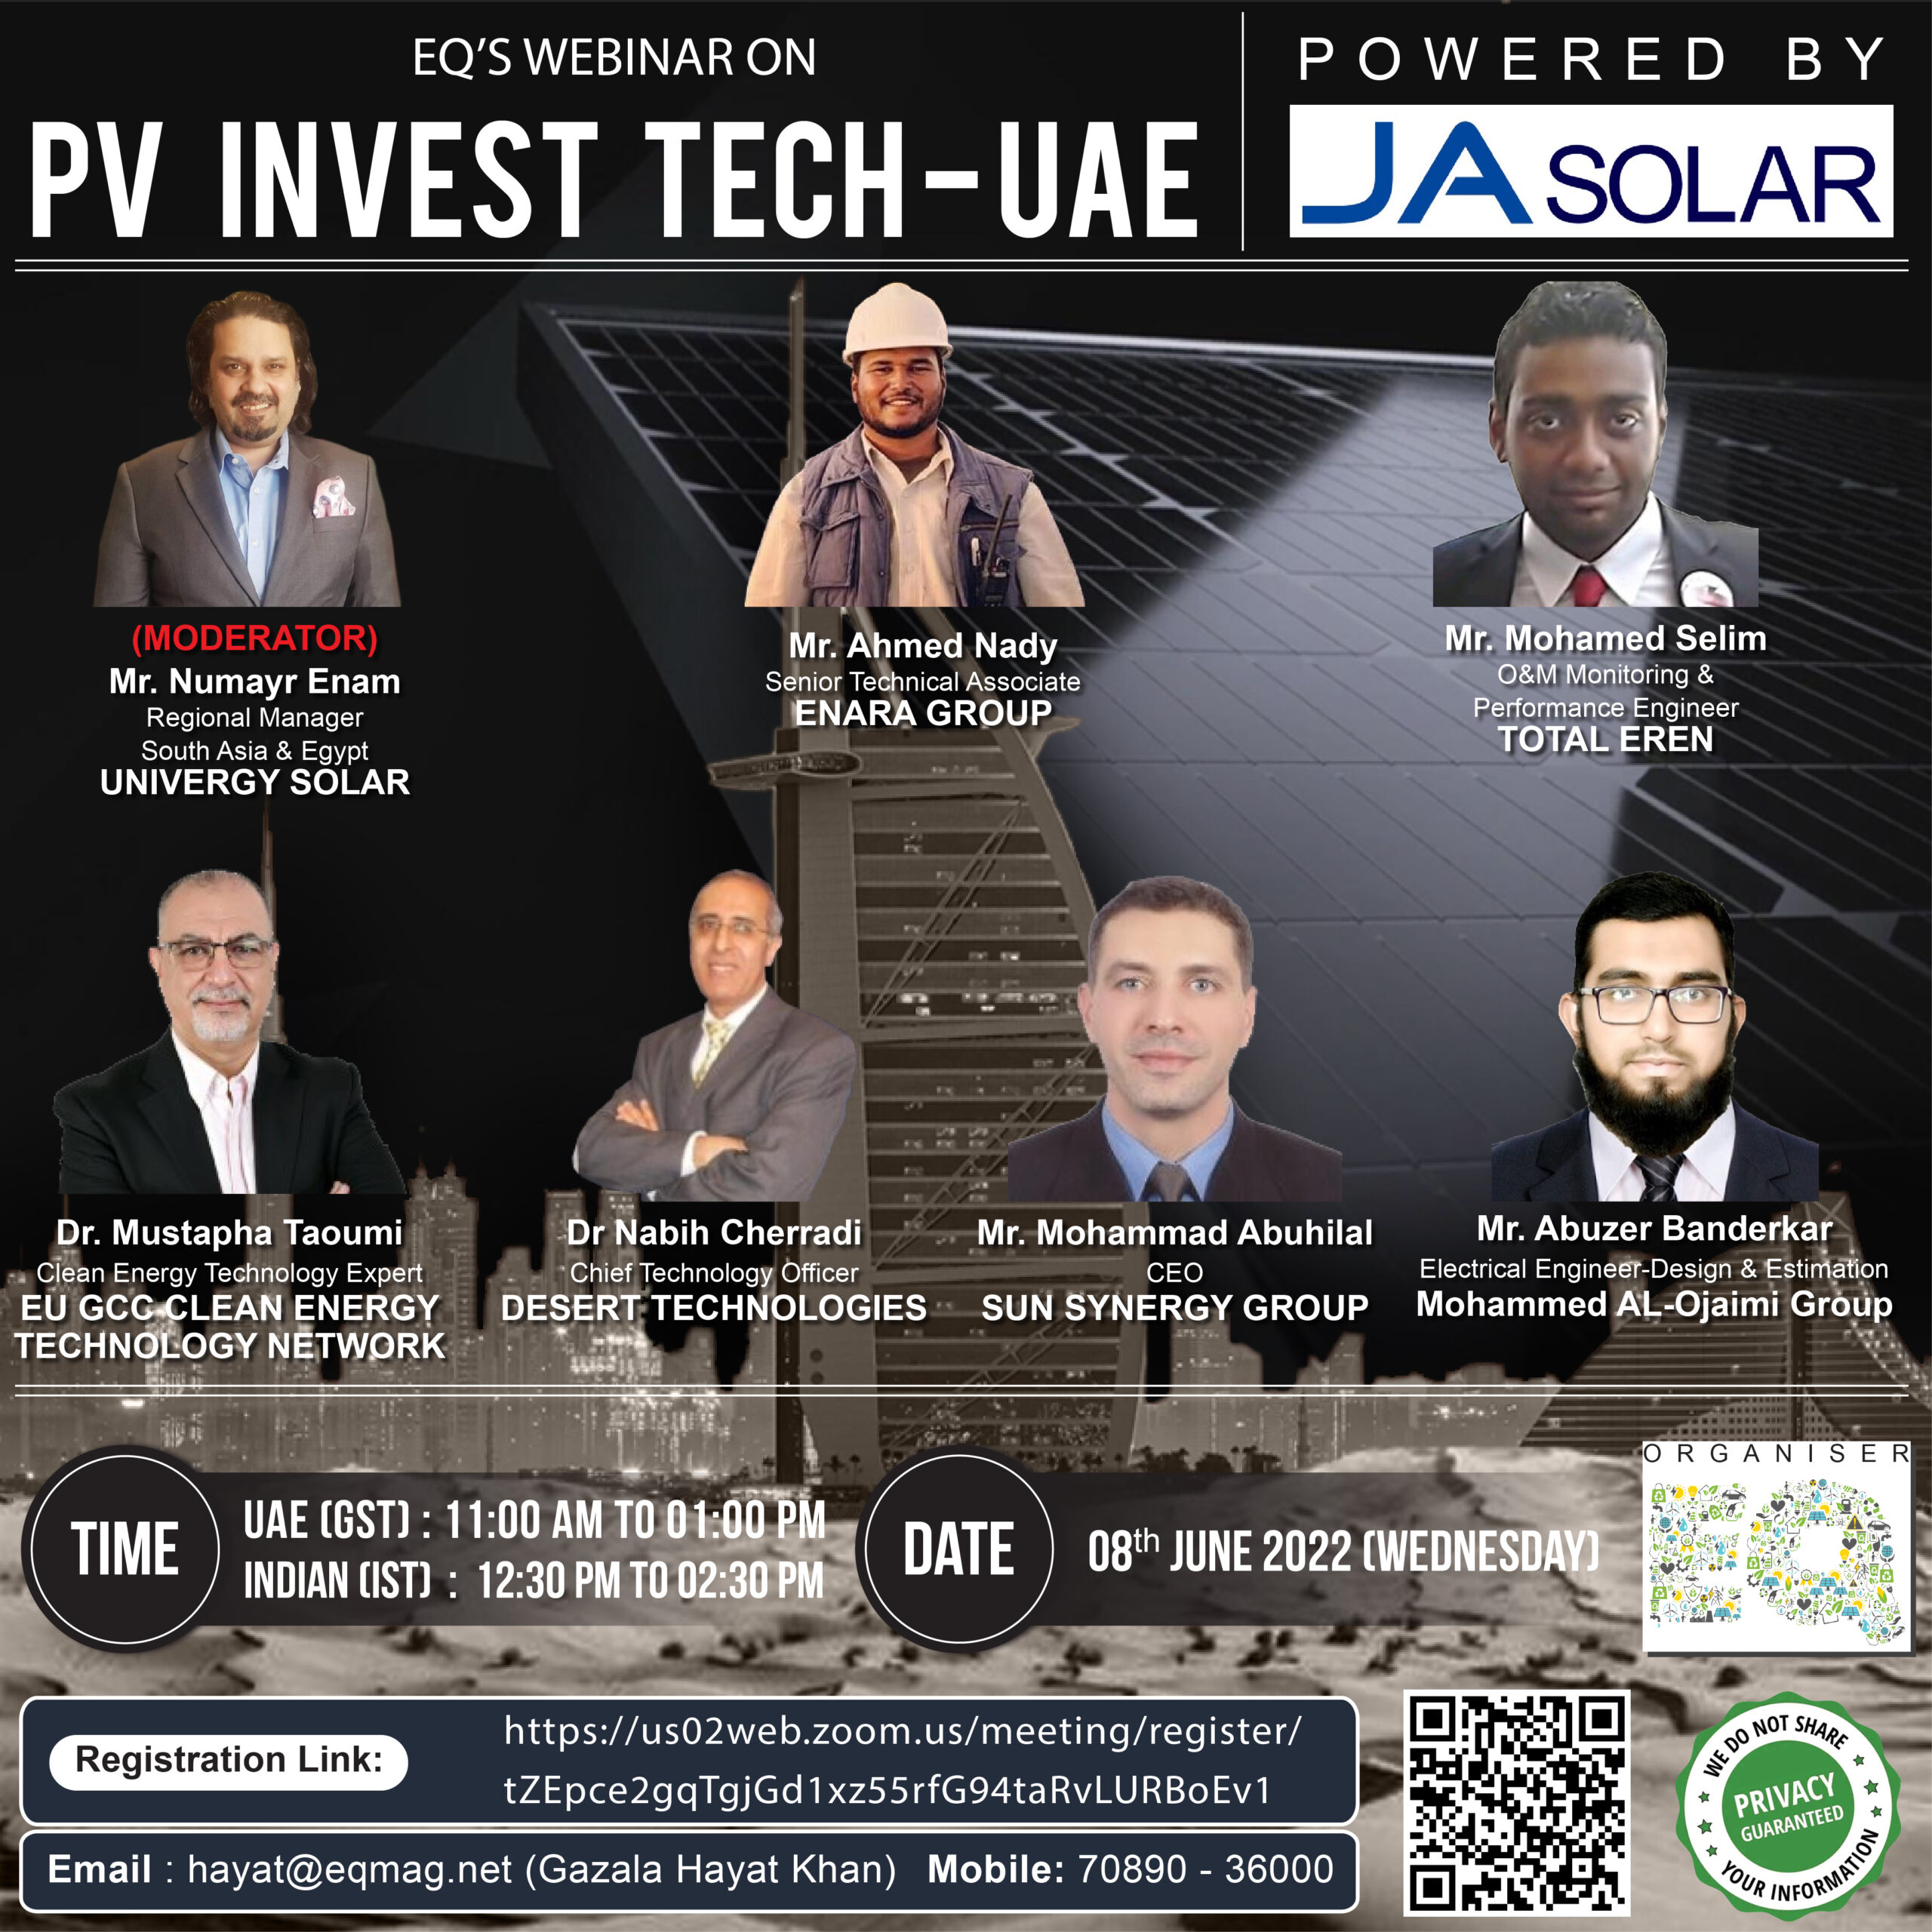 EQ Webinar on UAE PV InvesTech Powered by JA Solar 8th June 2022 (Wednesday) 12:30 PM Onwards….Register Now!